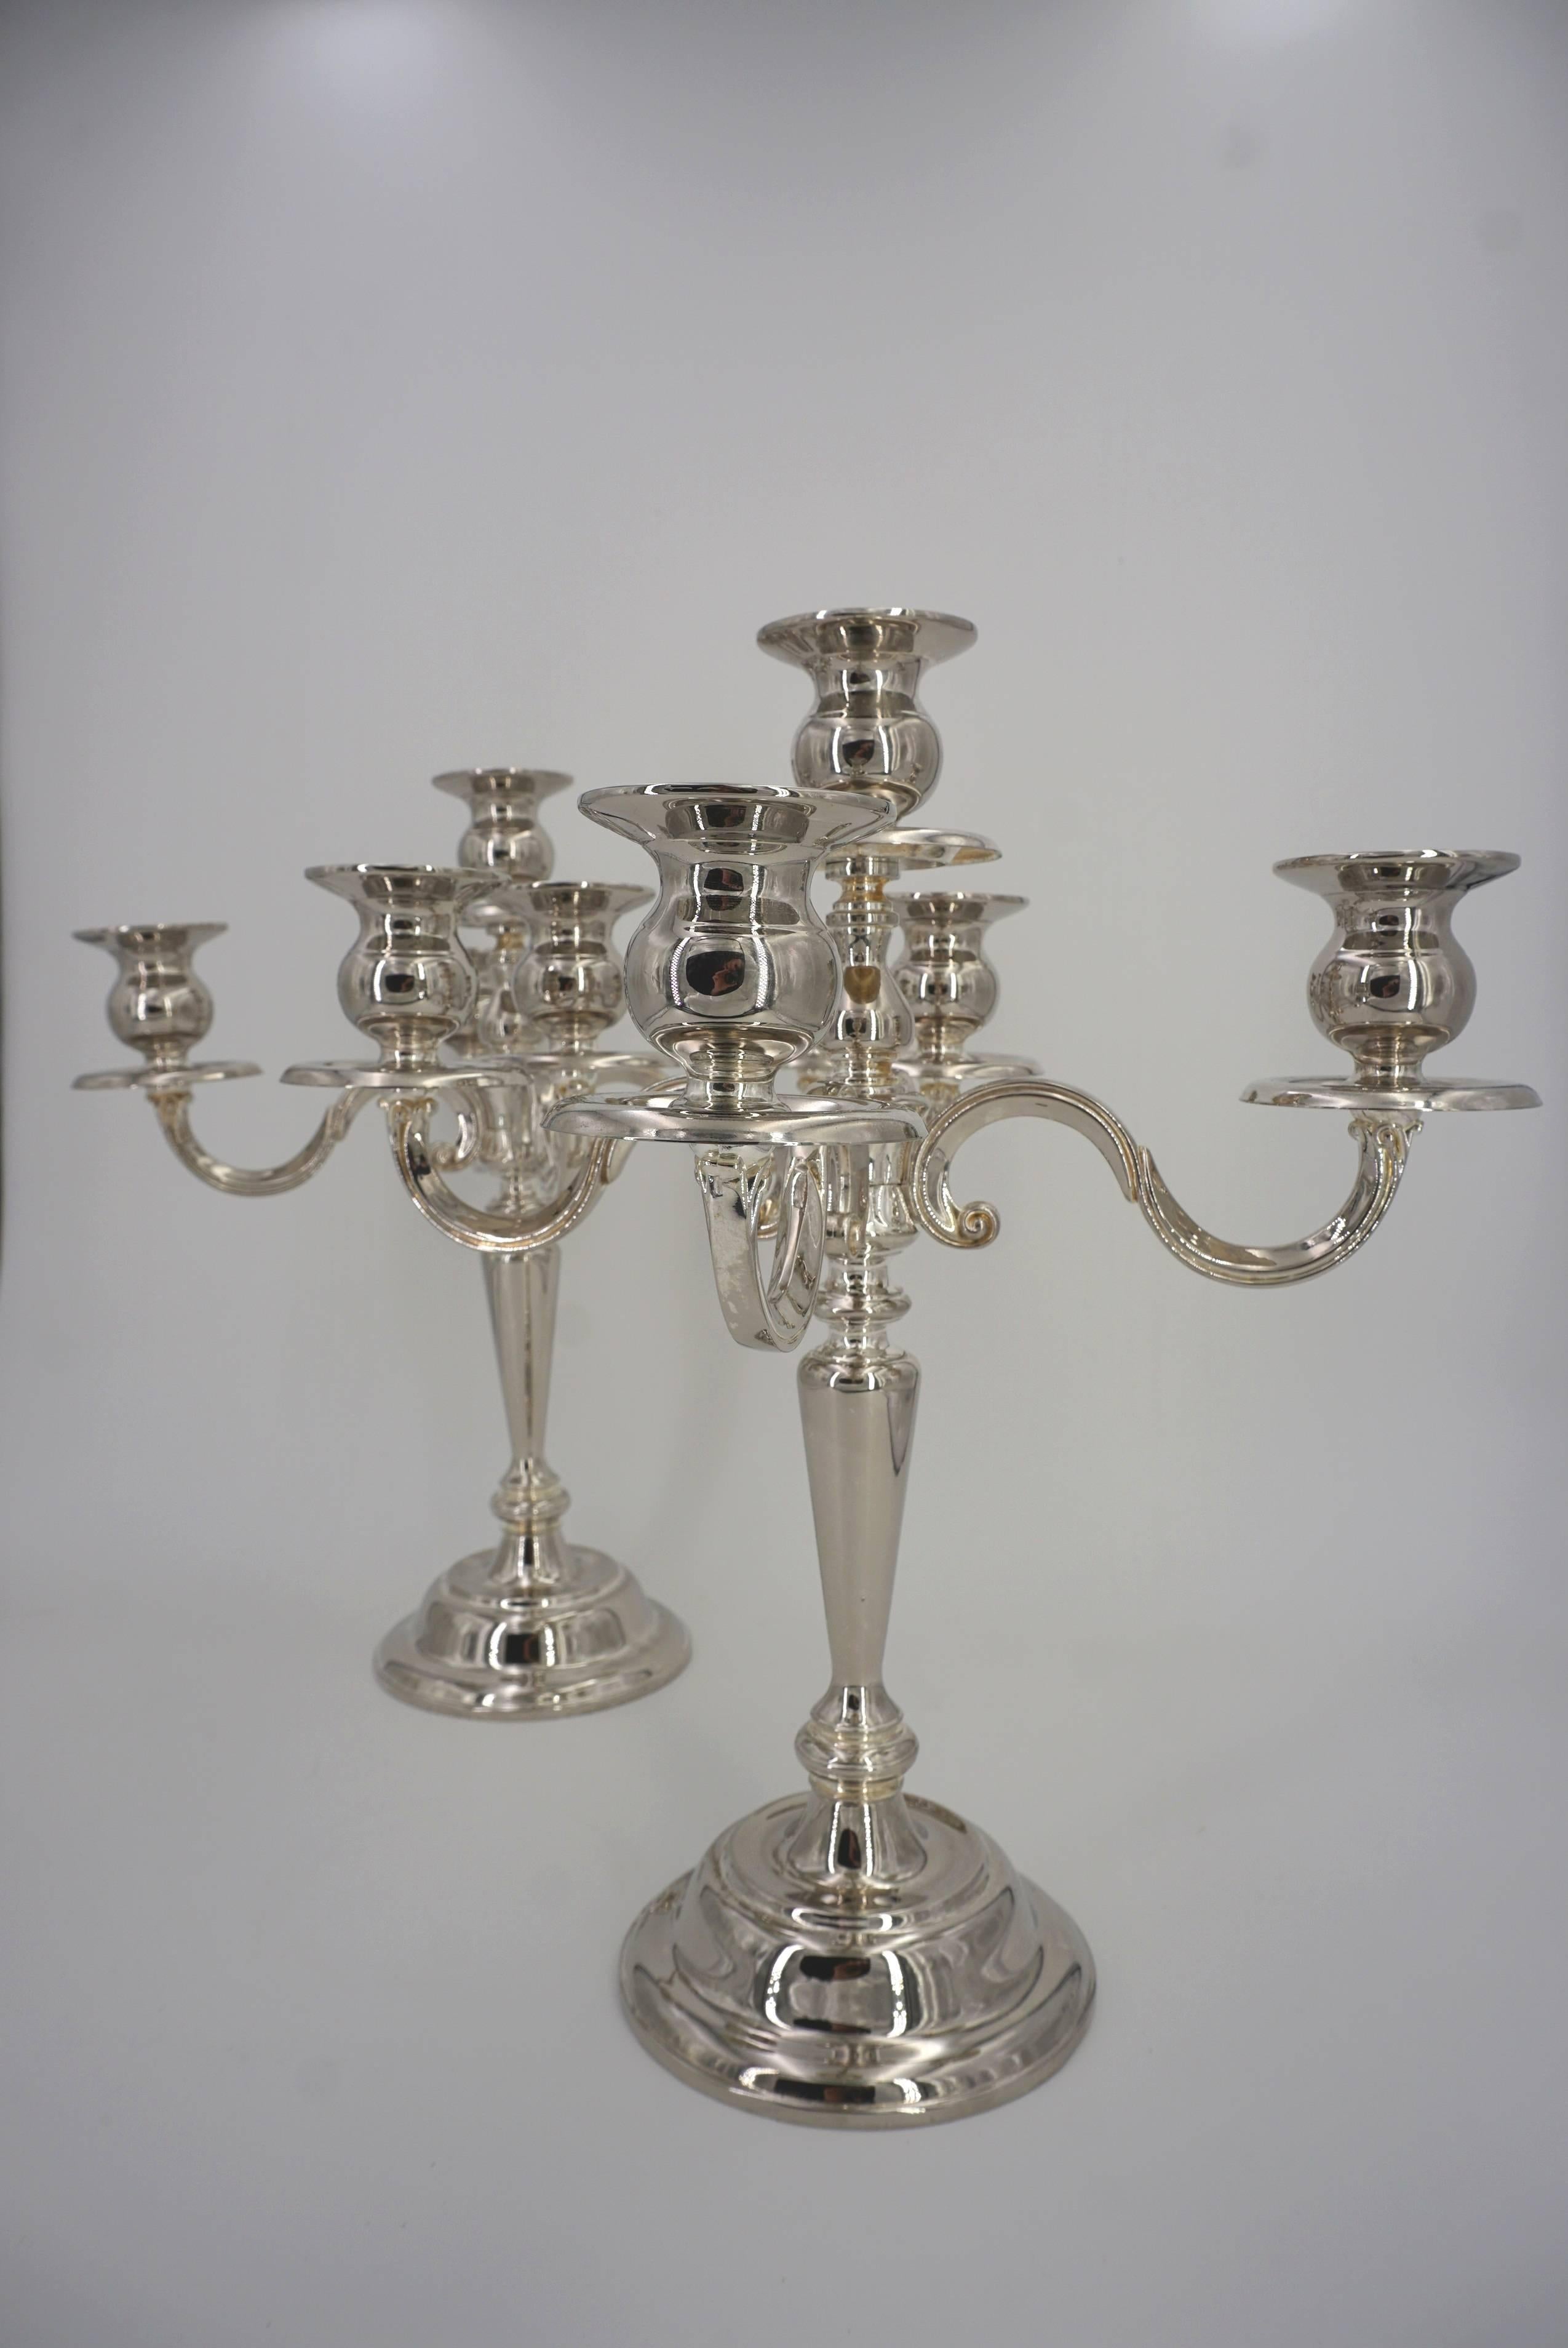 Pair of French silver candlesticks, brilliant and sparkling and in excellent condition.